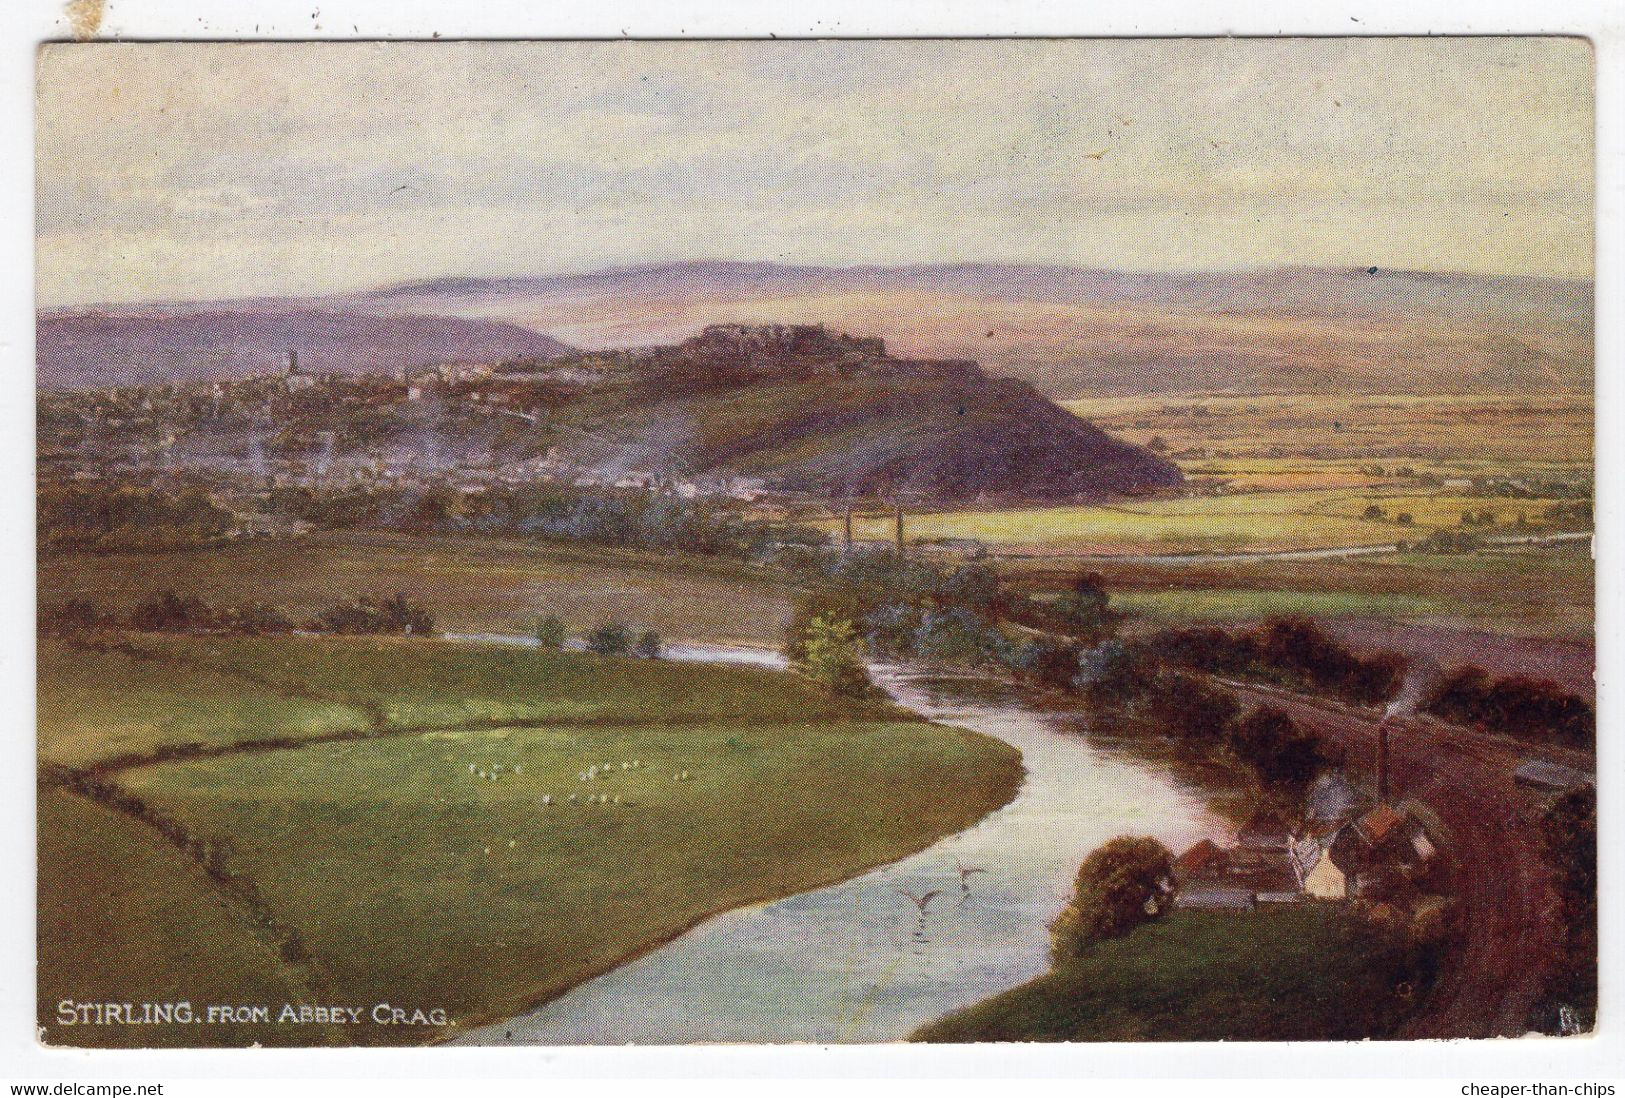 STIRLING From Abbey Crag - Tuck Oilette 6157 - Stirlingshire